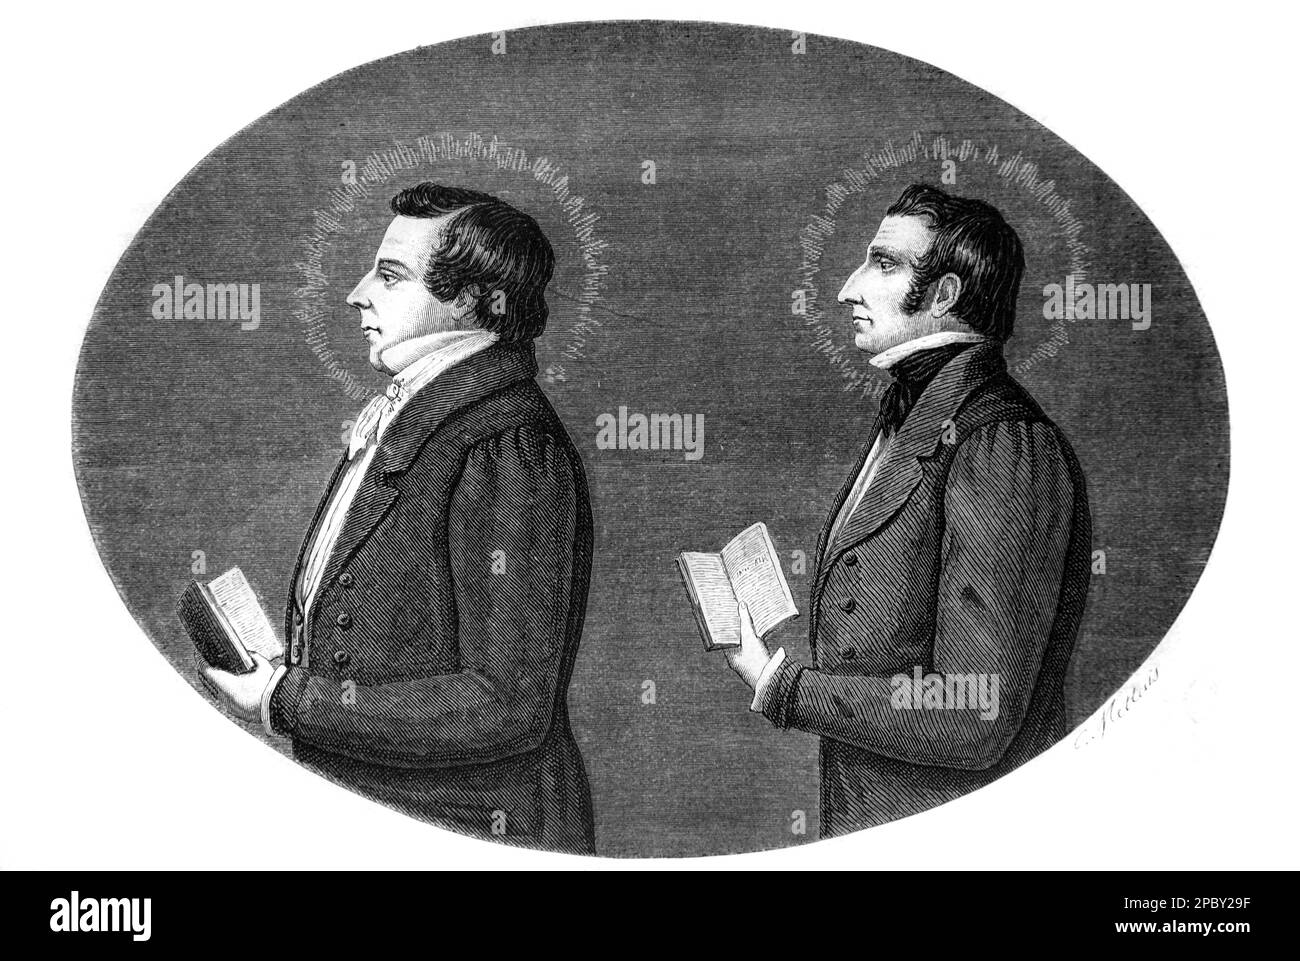 Portrait of Joseph Smith (1805-1844) Founder & First President (1830-1844) of the Church of Jesus Christ Later-day Saints, Mormonism or LDC Movement & His Brother Hyrum Smith (1800-1844) Assistant President of the LDC Church. Vintage or Historic Engraving or Illustration 1862 Stock Photo